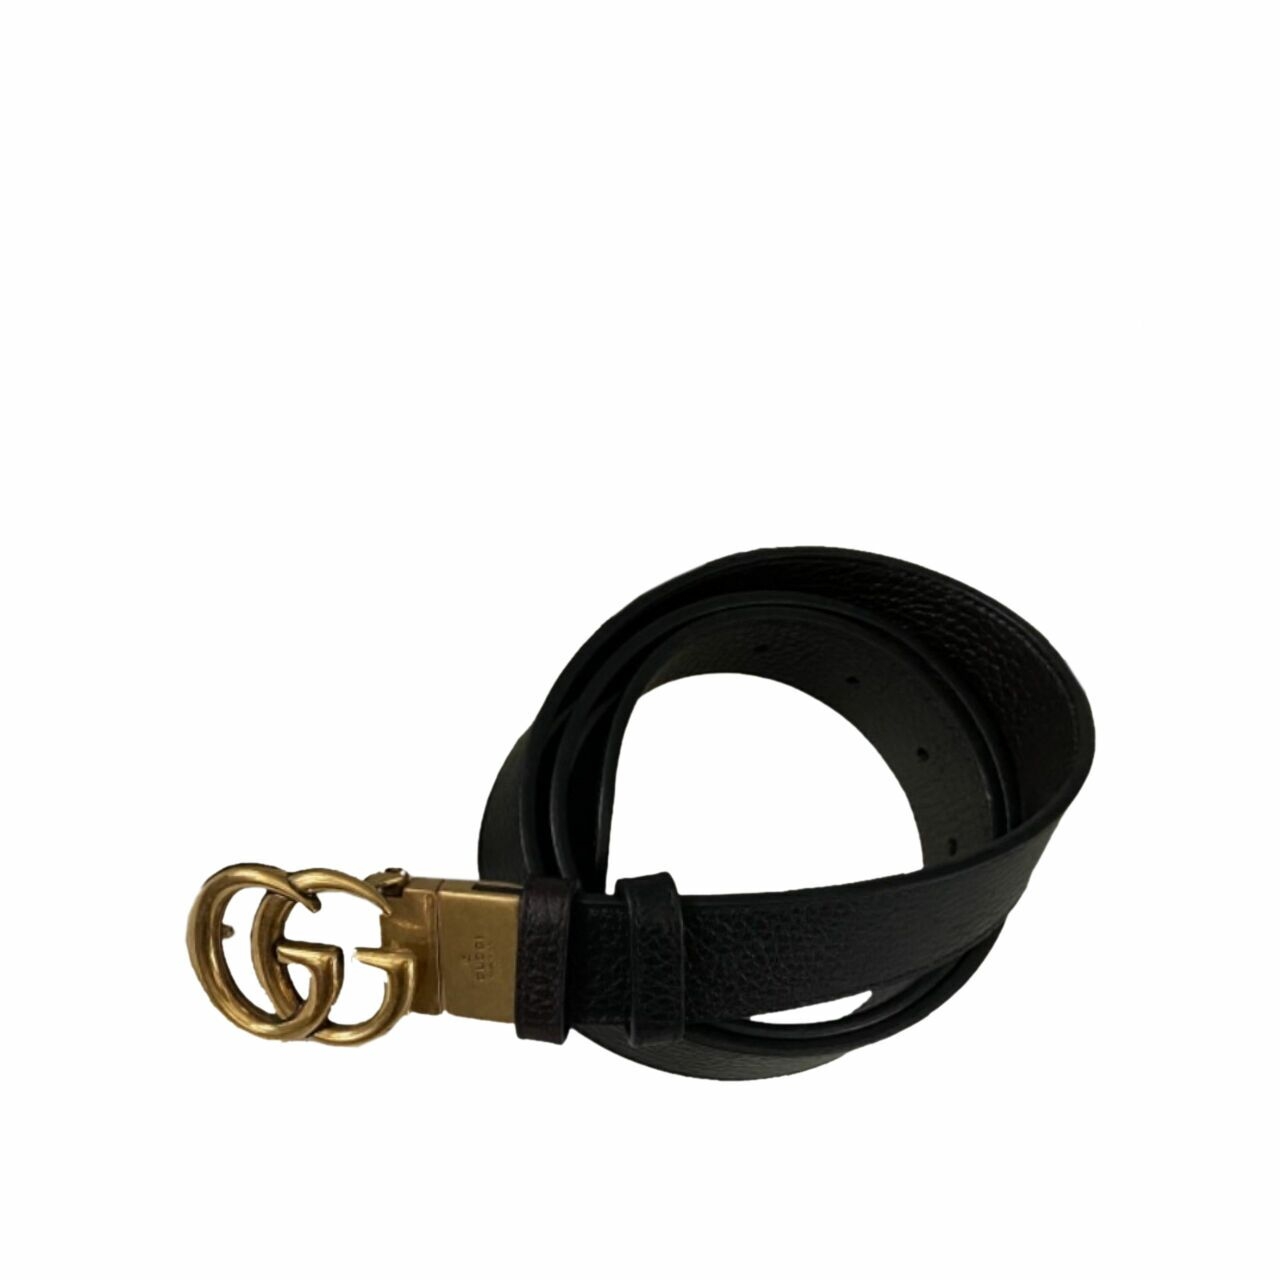 Reversible Leather Belt with Double G Buckle